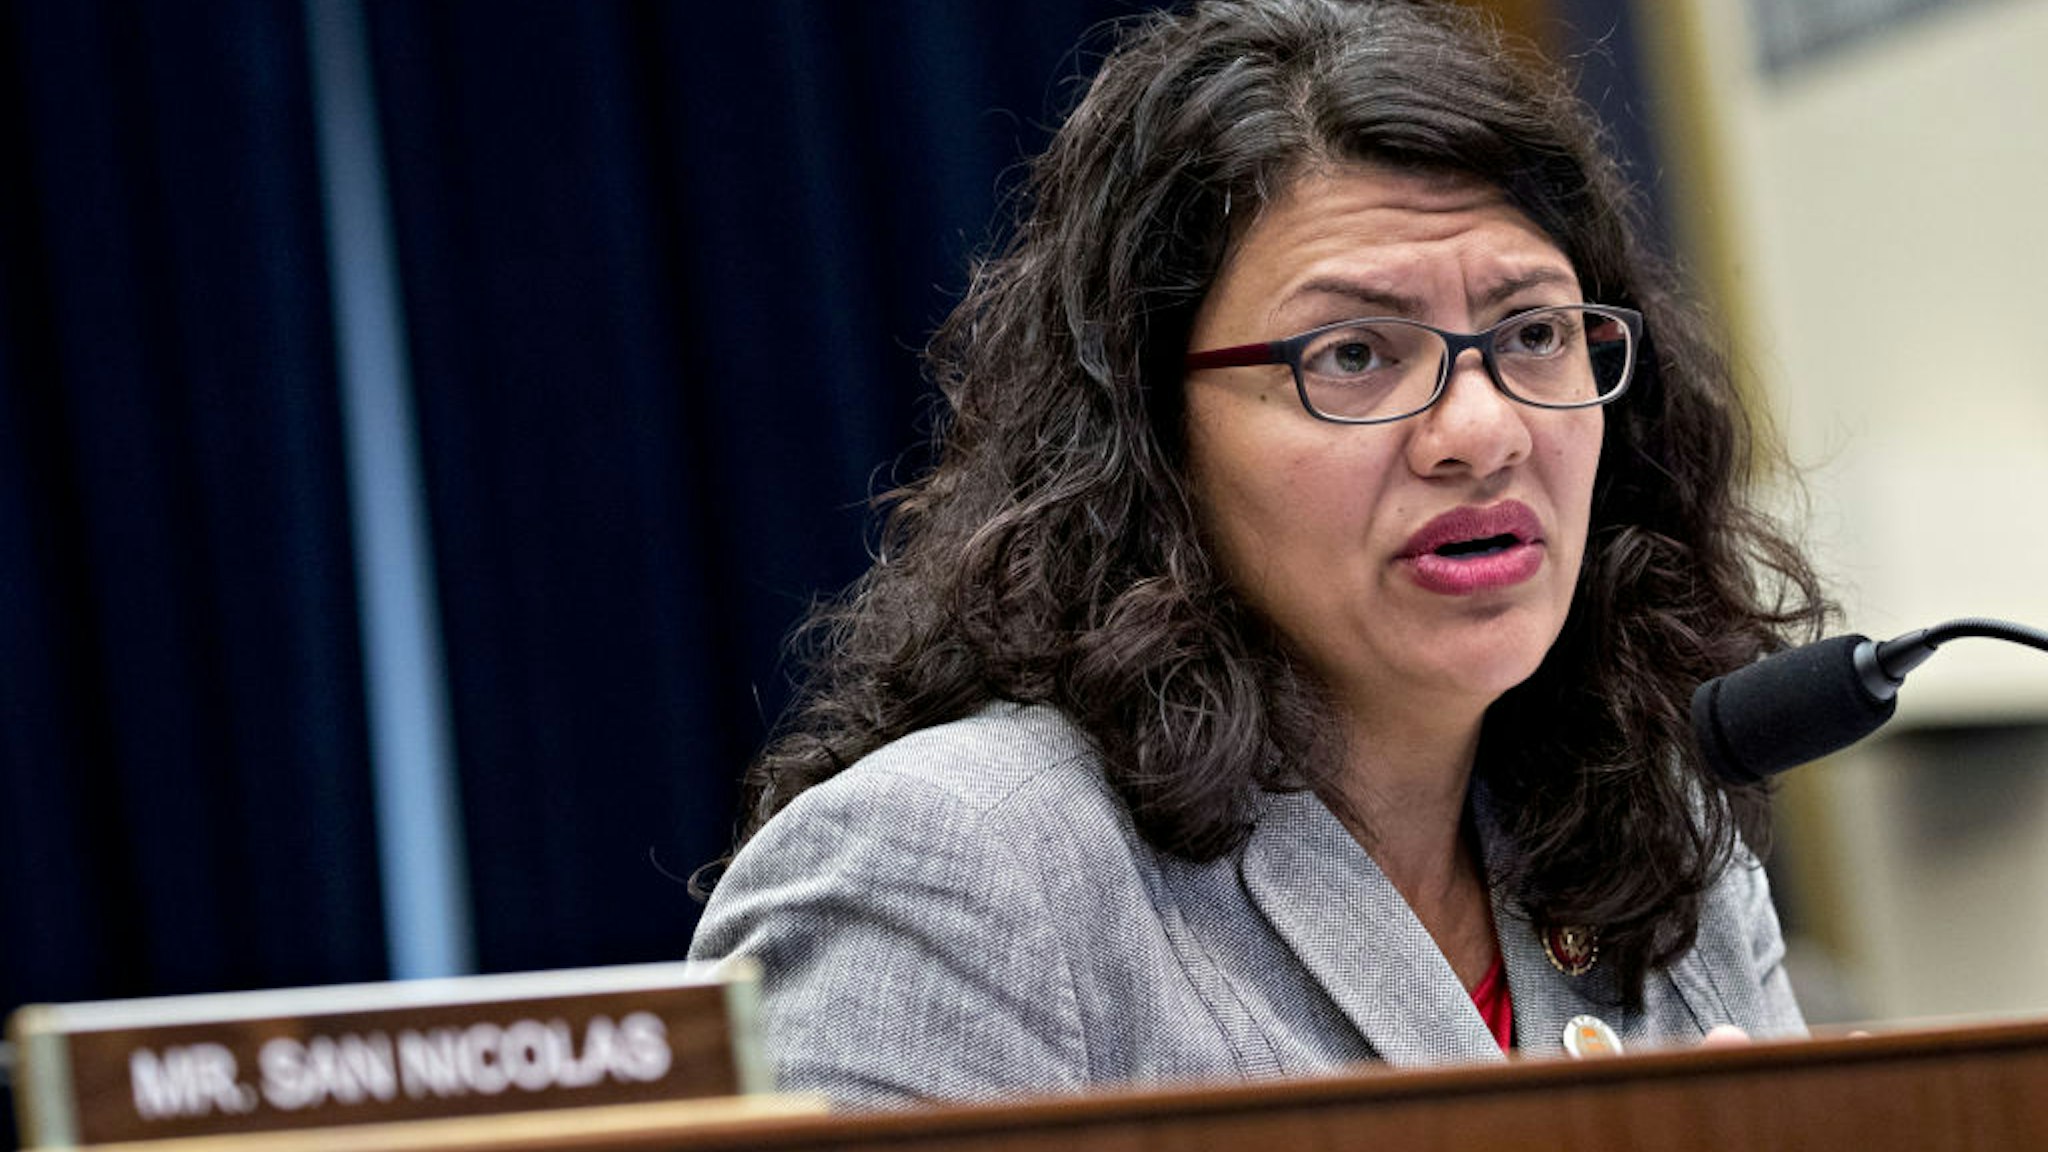 Rashida Tlaib questions Jerome Powell during a House Financial Services Committee hearing